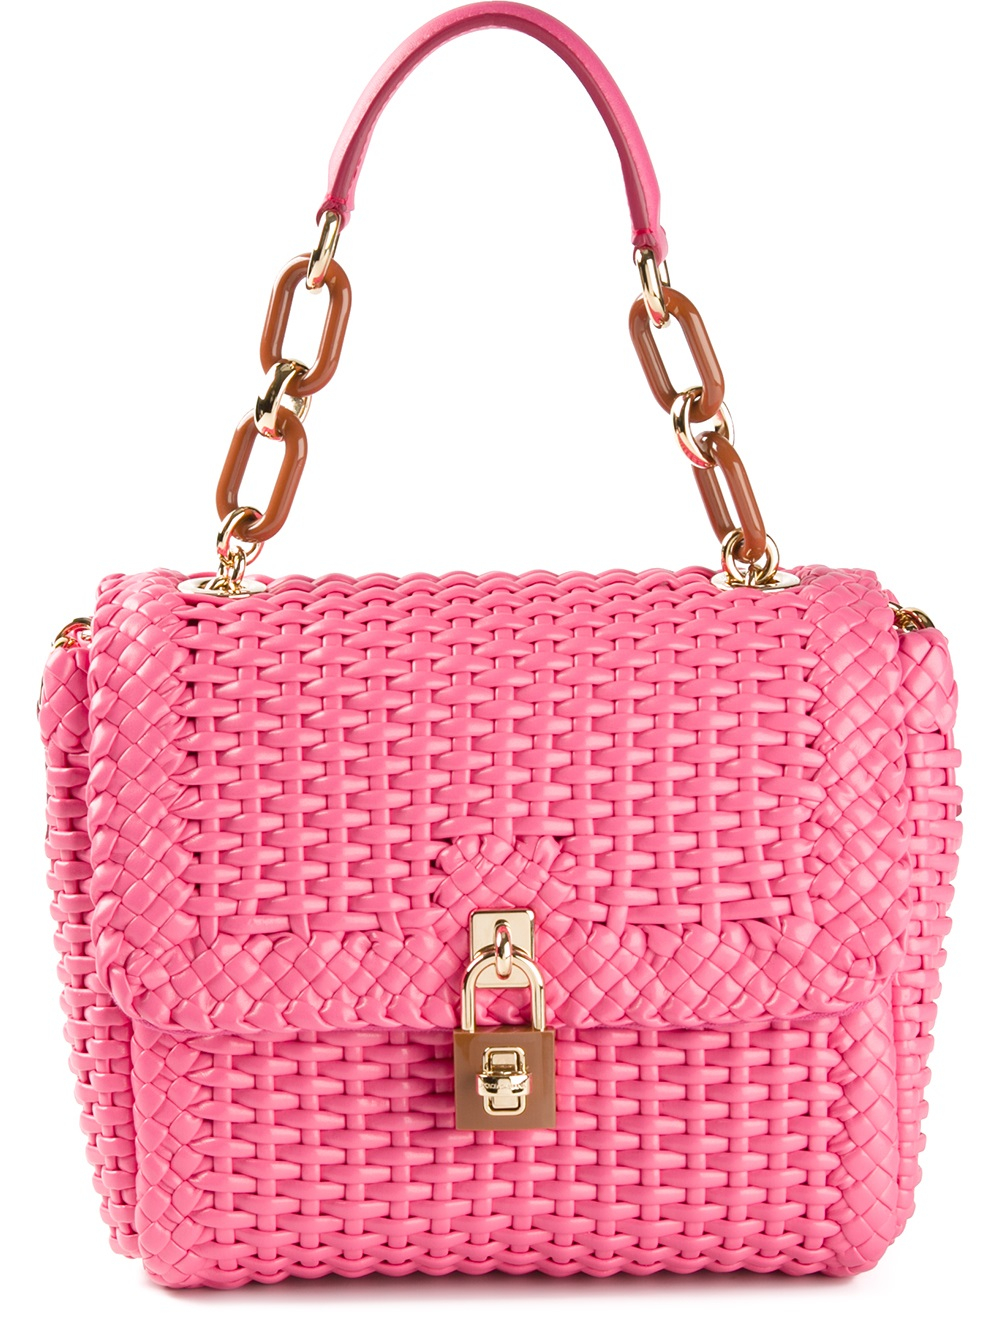 Lyst - Dolce & Gabbana Woven Tote Bag in Pink